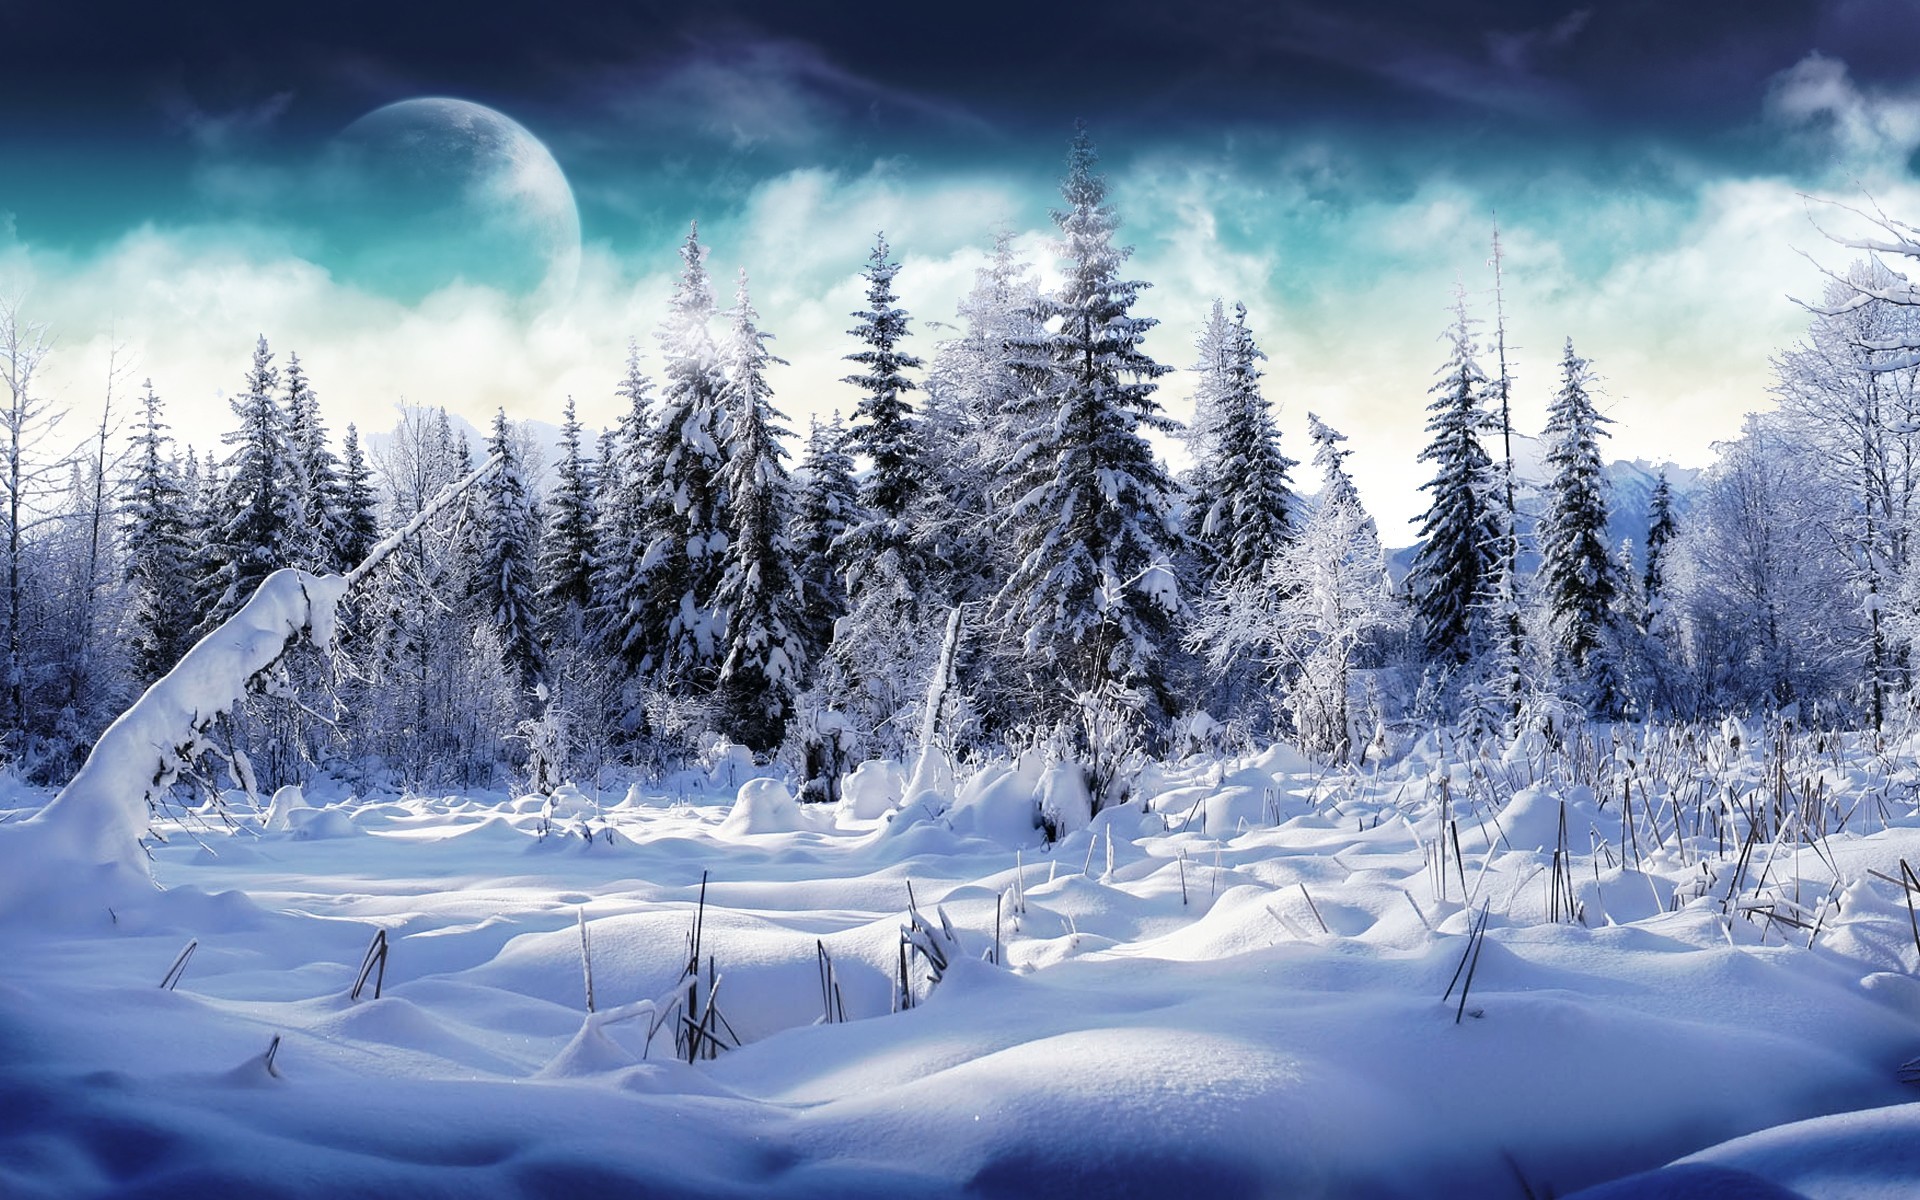 General 1920x1200 winter Moon trees snow mountains nature digital art planet space art landscape cold ice outdoors photo manipulation